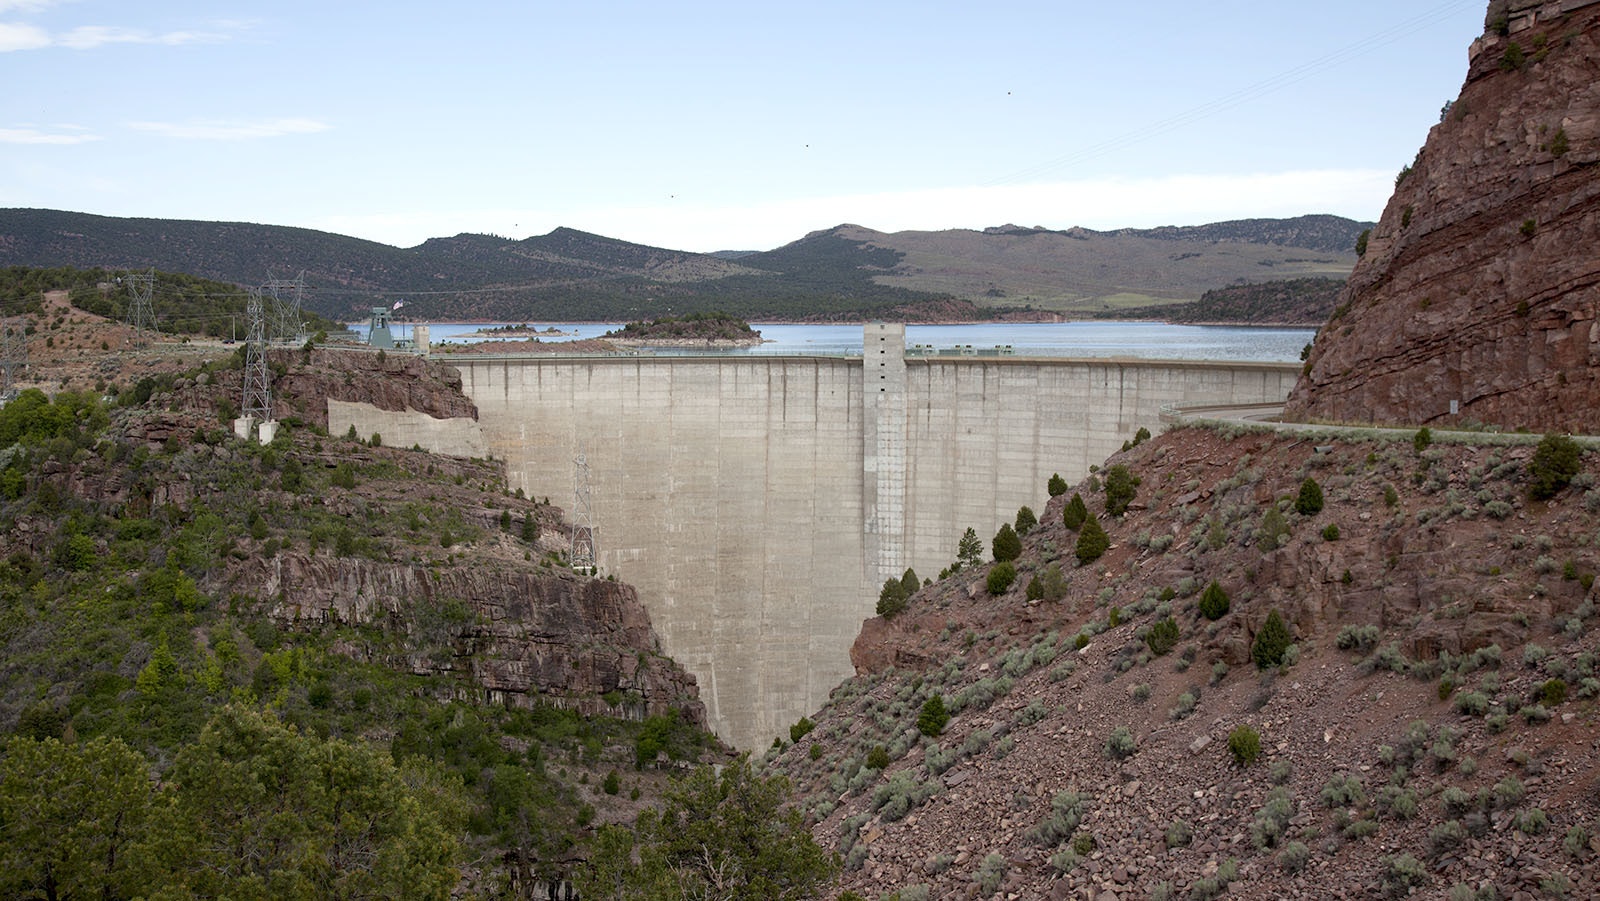 Flaming Gorge Dam was made operational Sept. 27, 1963, during a ceremony in which President John F. Kennedy turned it on.